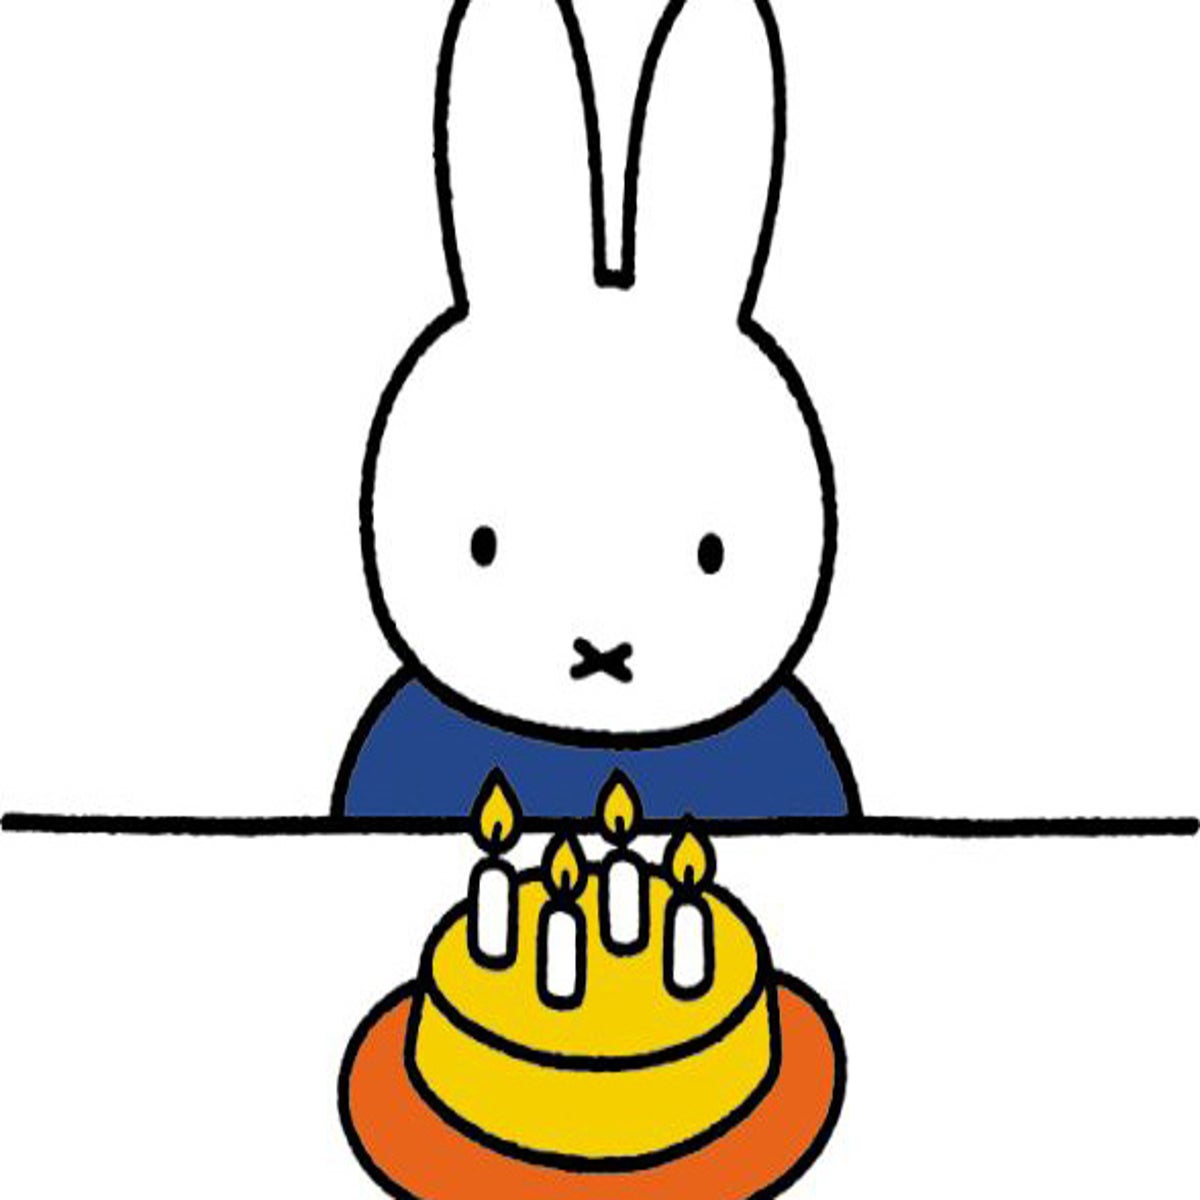 Thought Miffy was a cute kids' bunny? At 60, it seems, she's a